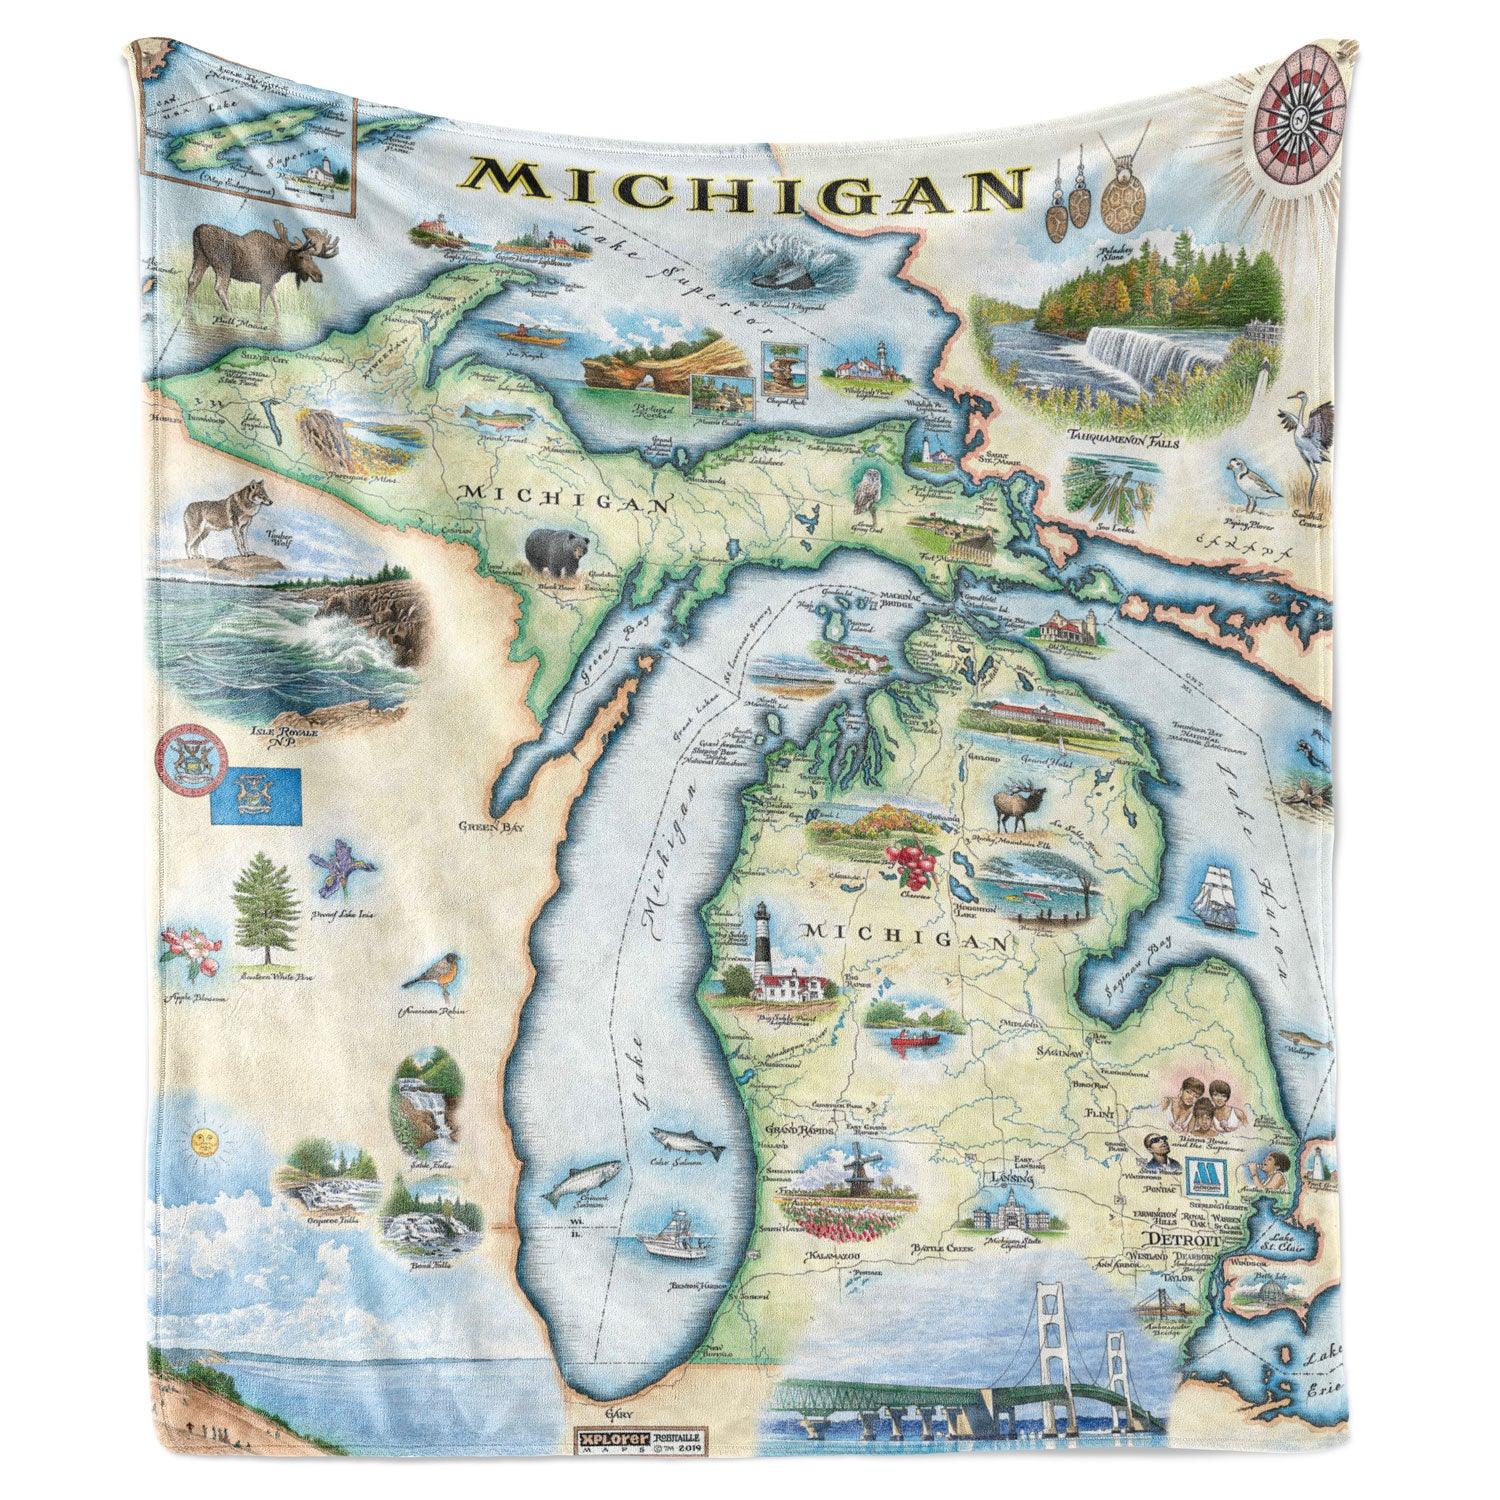 Hanging blanket with a map of the state of Michigan on it. Artistic map on a cozy fleece blanket.